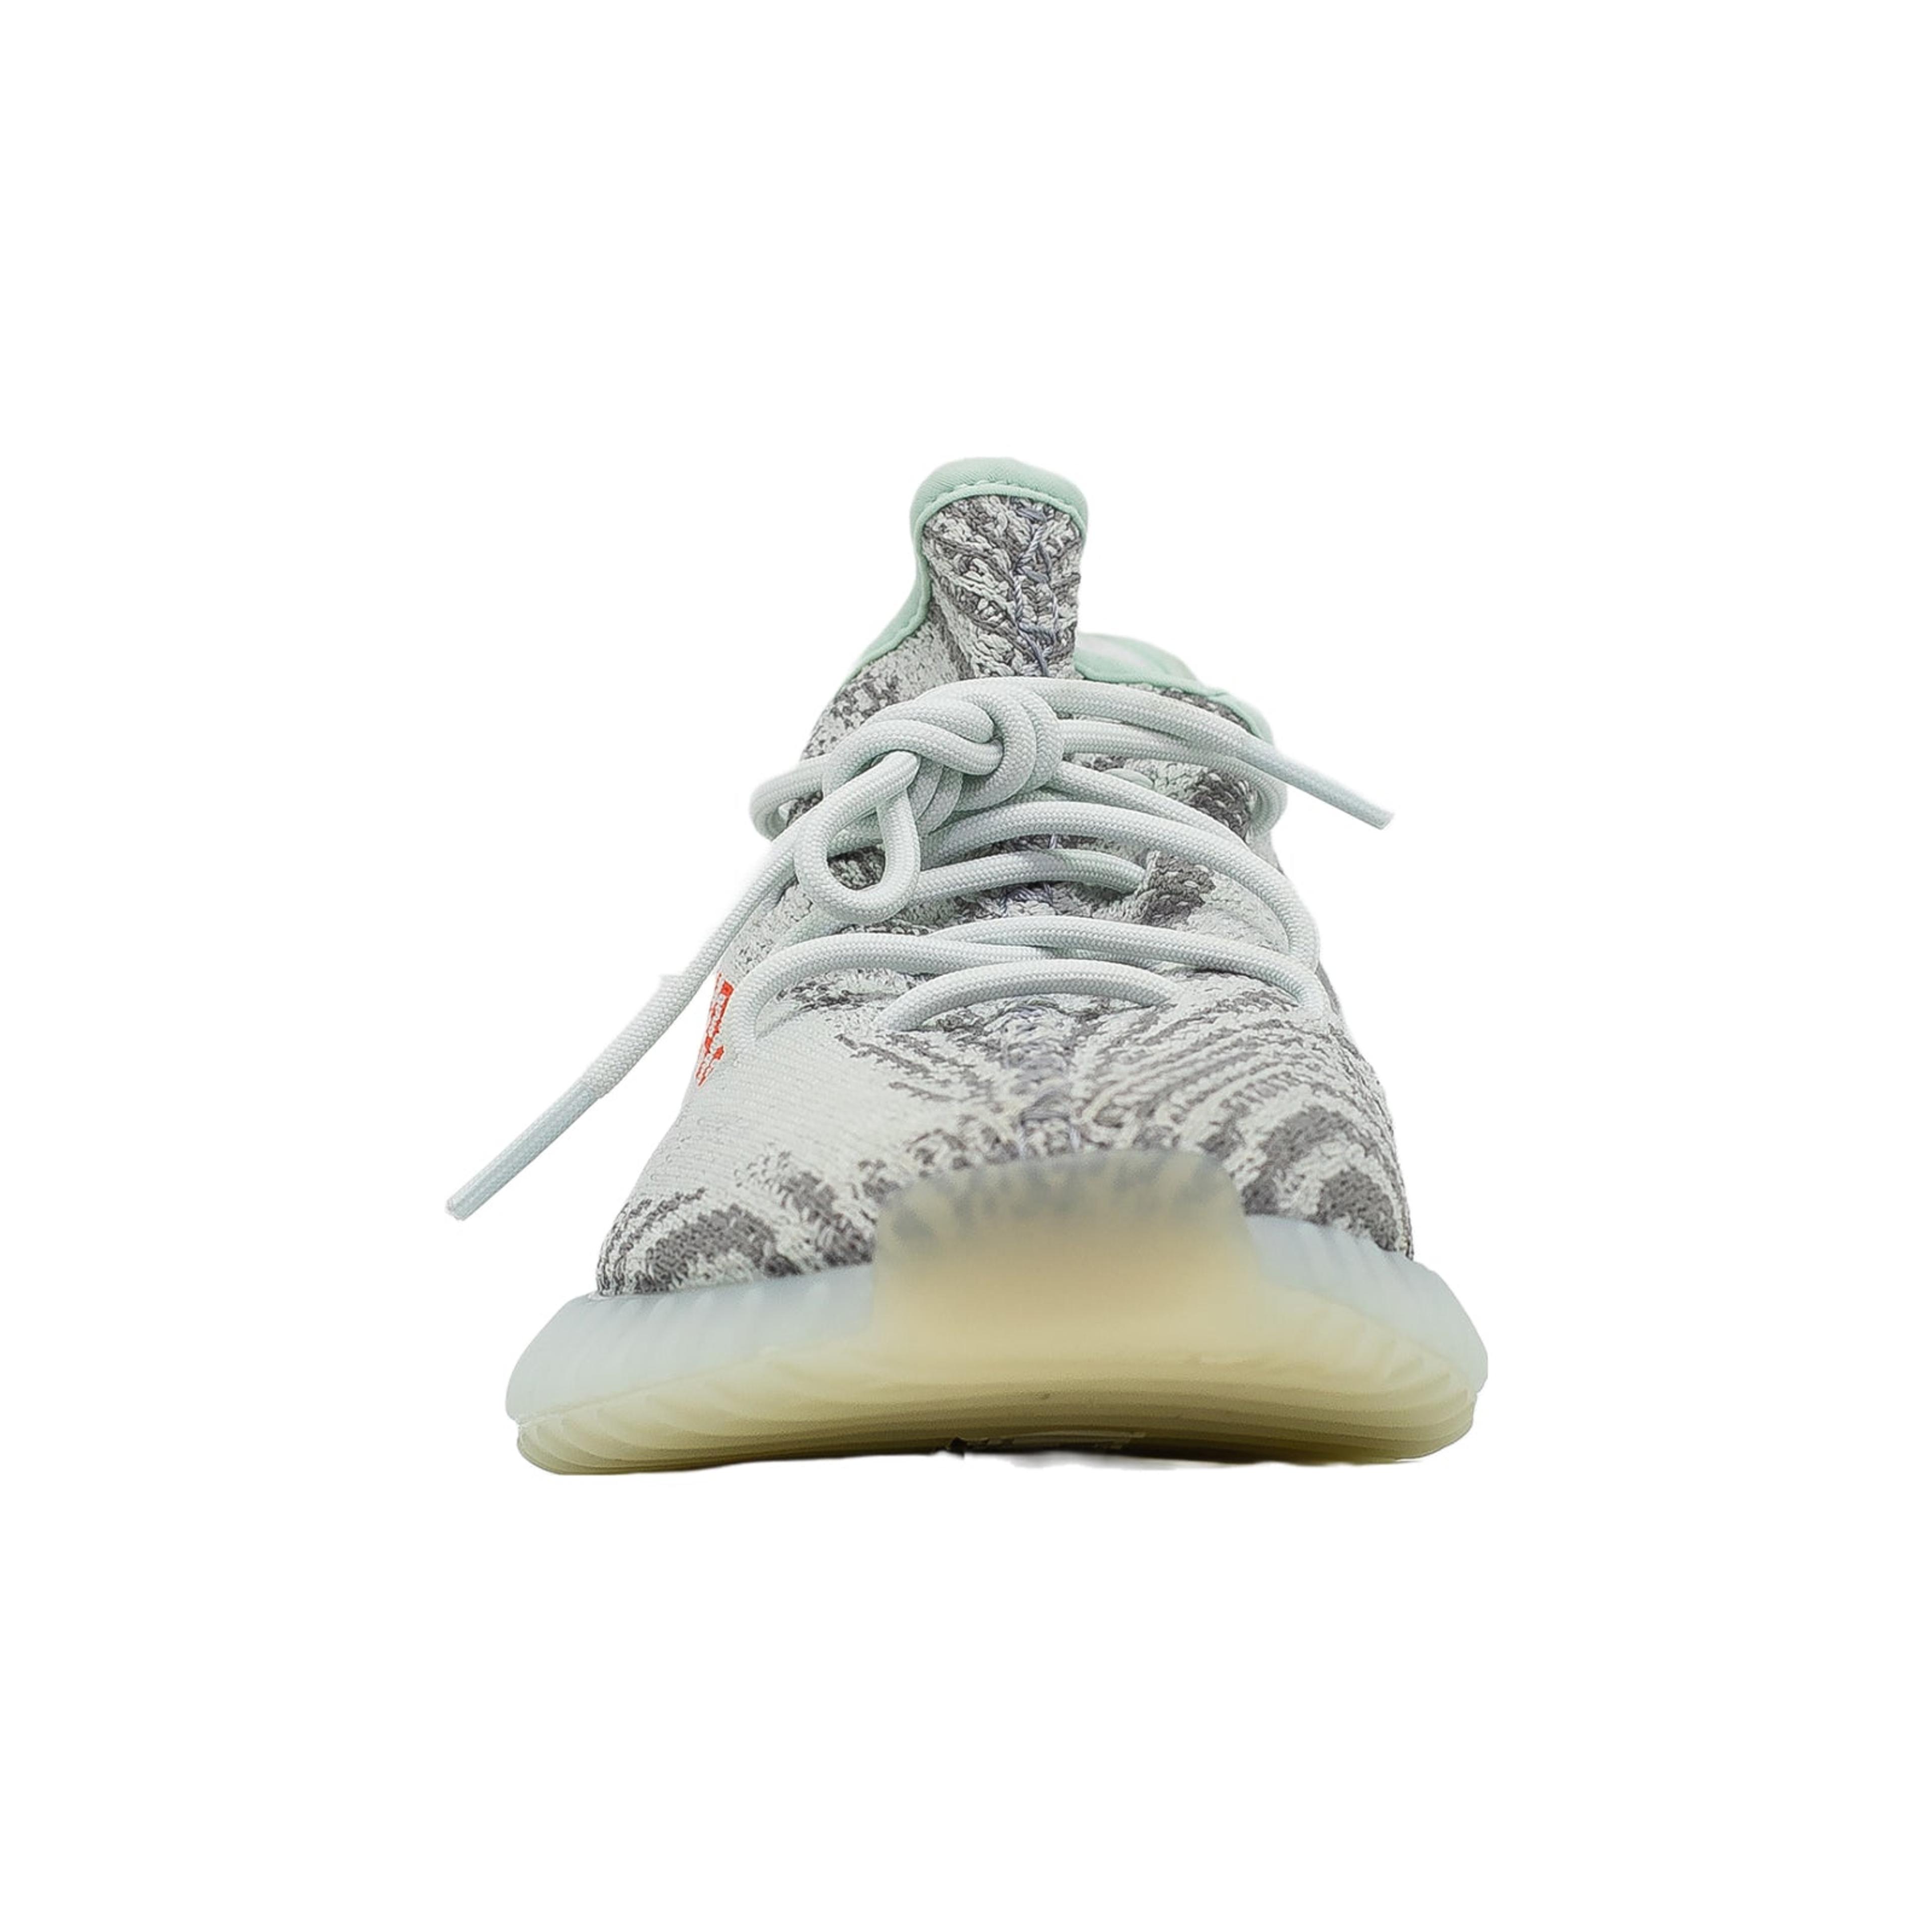 Alternate View 2 of Yeezy Boost 350 V2, Blue Tint